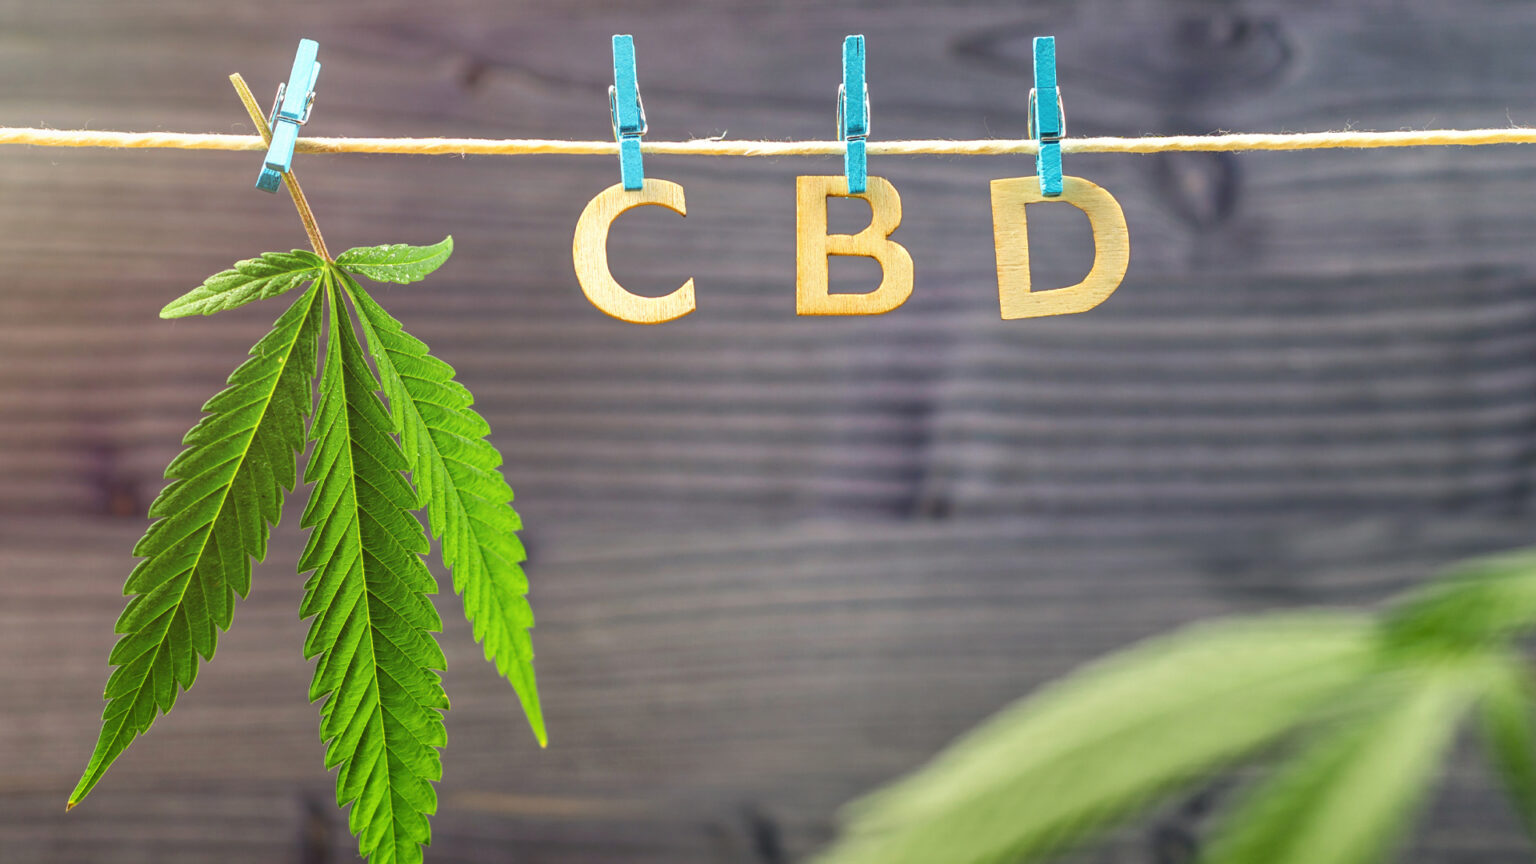 What Does CBD Stand For